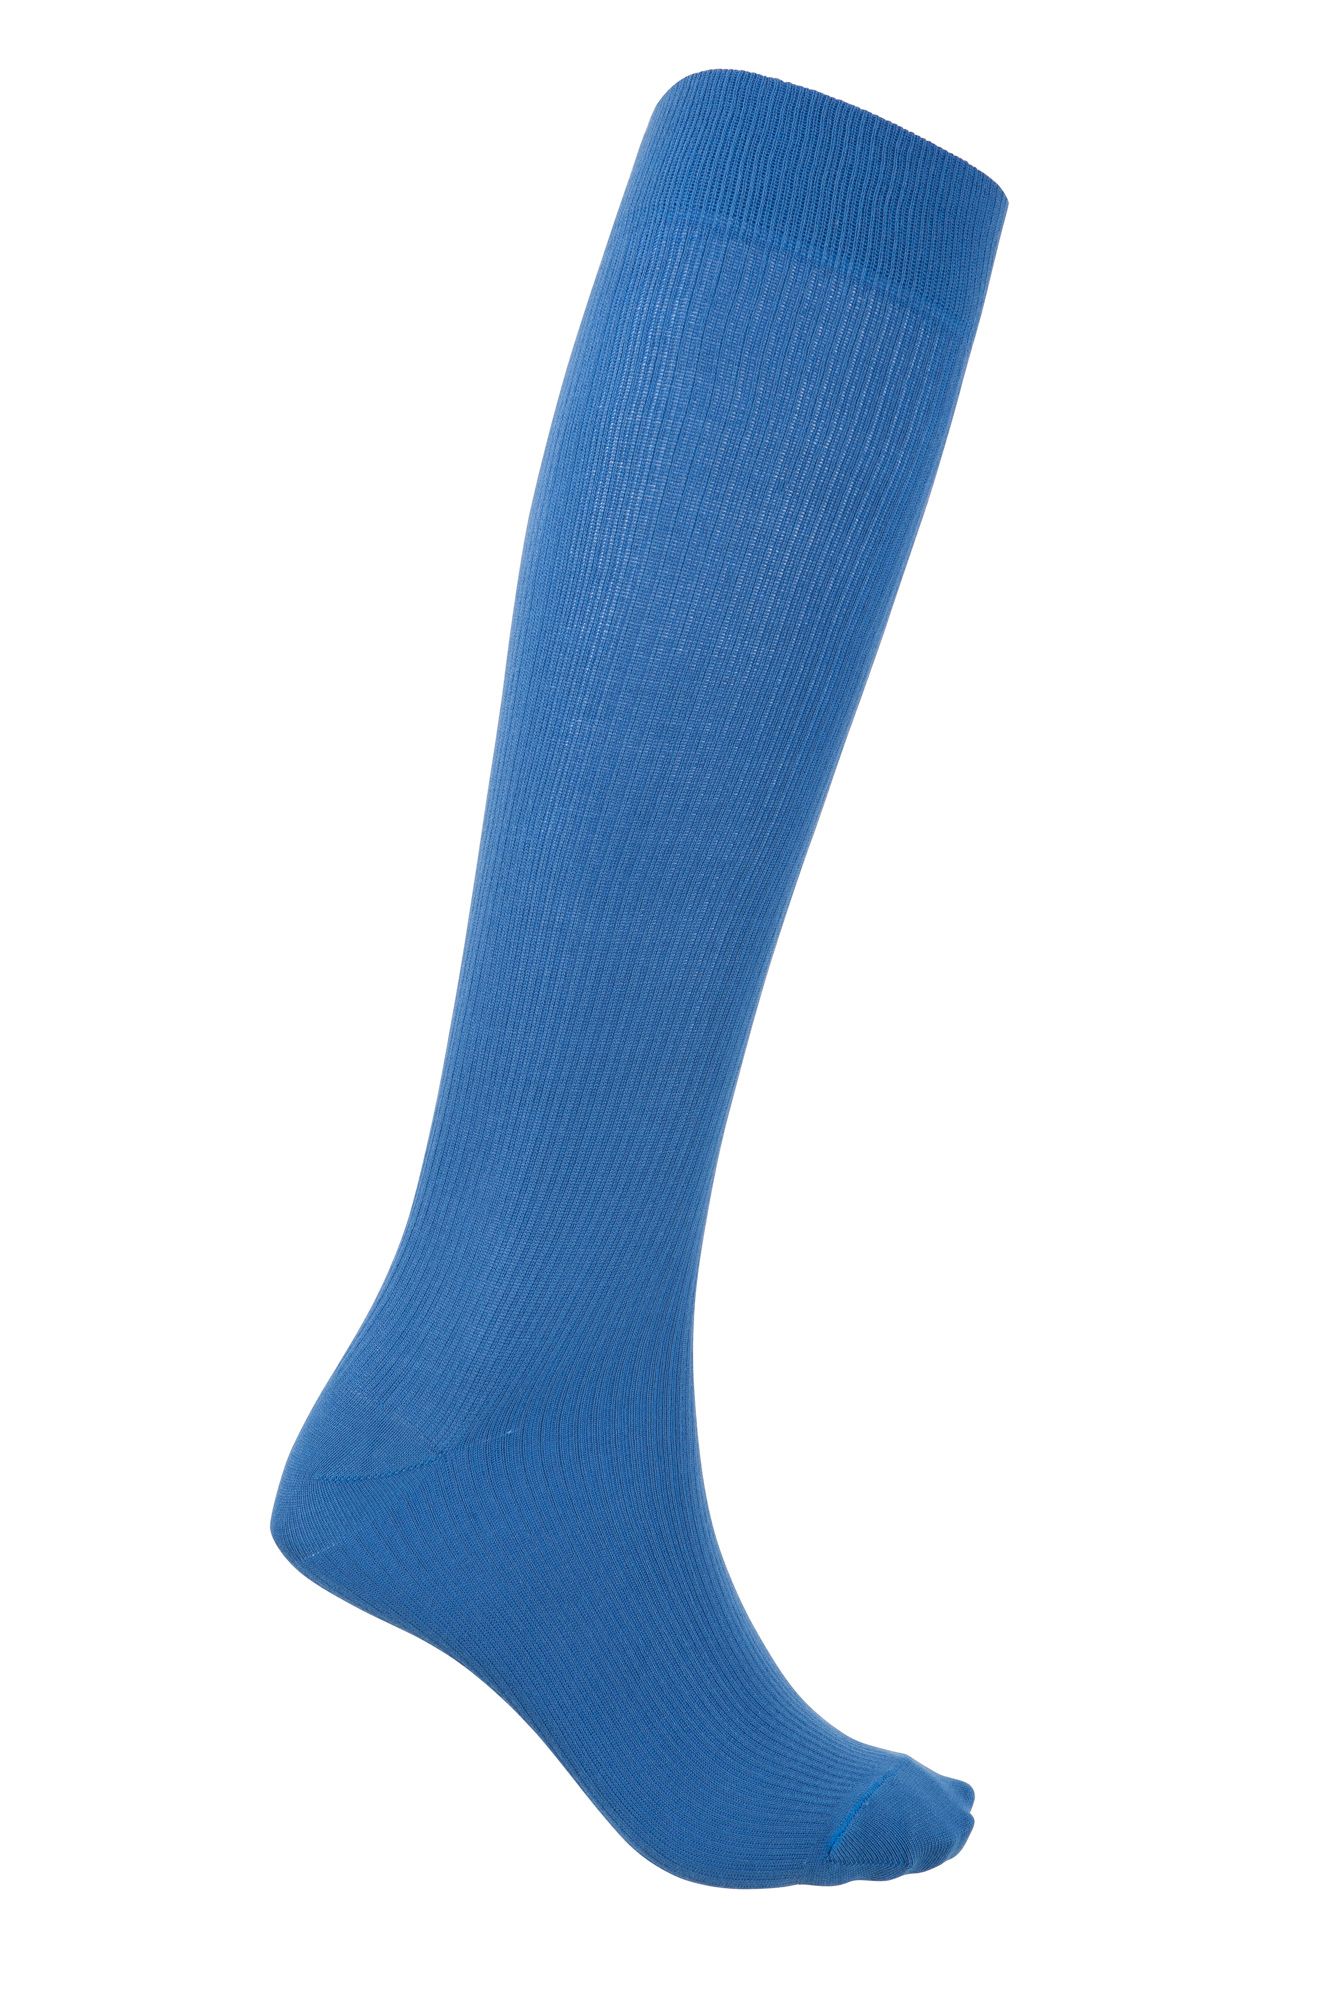 SupCare Unisex Support Socks with Bamboo Fibers 15-21mmHg - Daylong